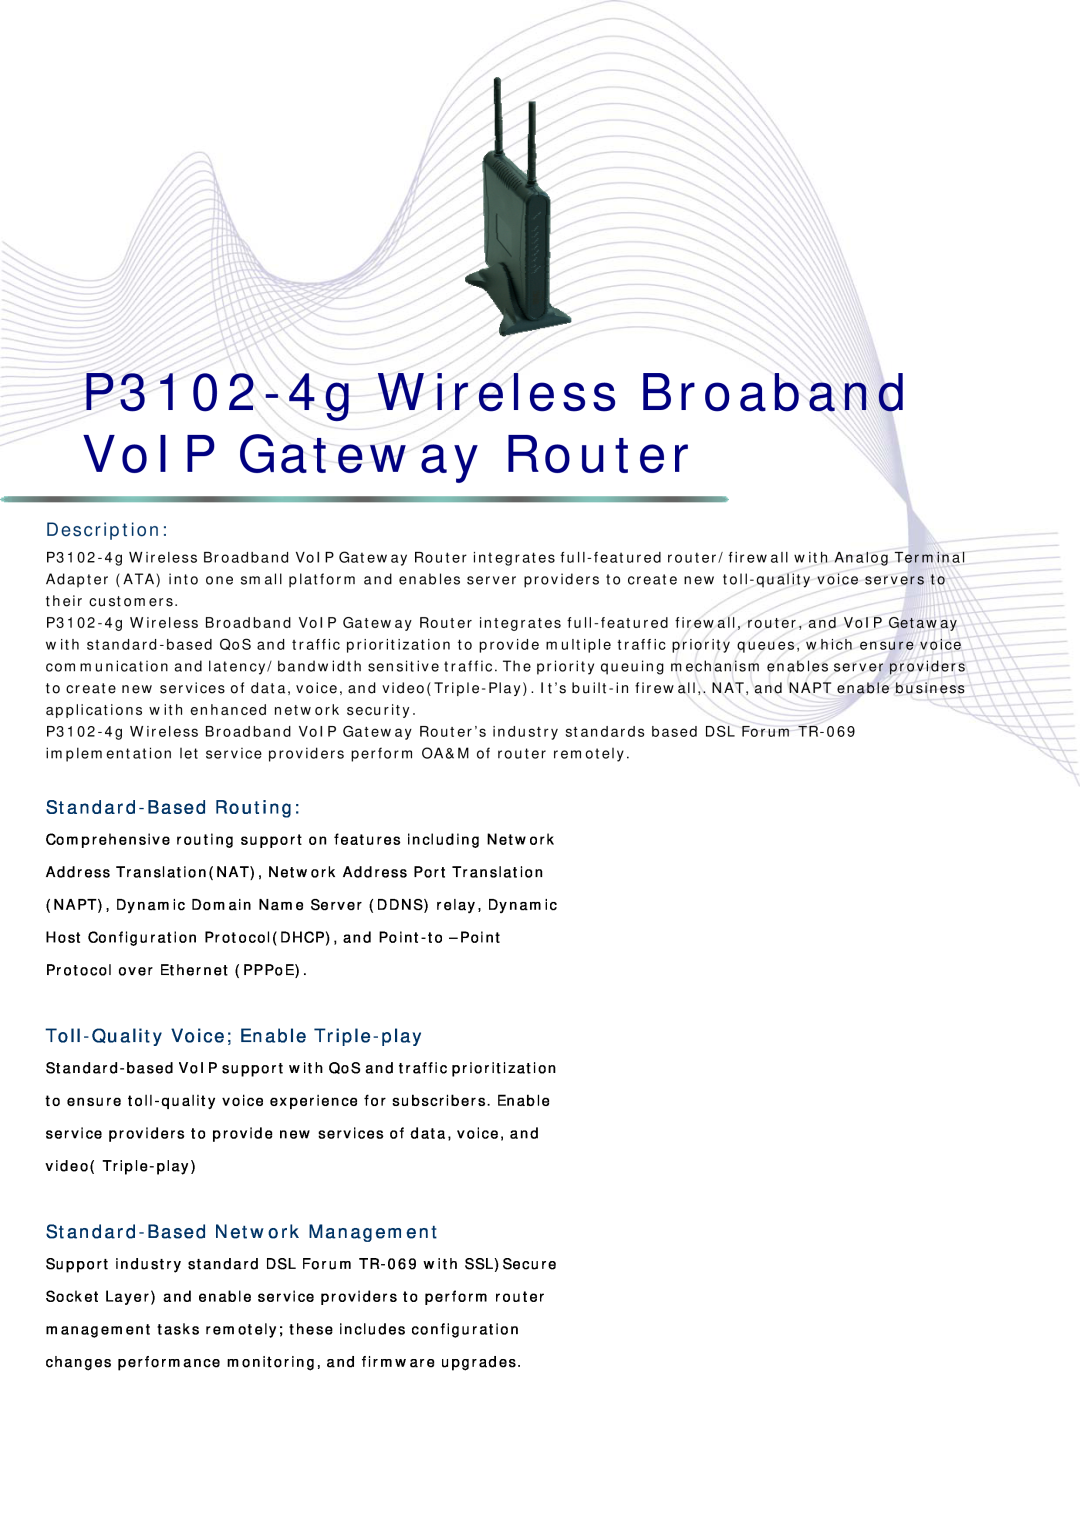 Abocom P3102-4g manual Description, Standard-Based Routing, Toll-Quality Voice Enable Triple-play 